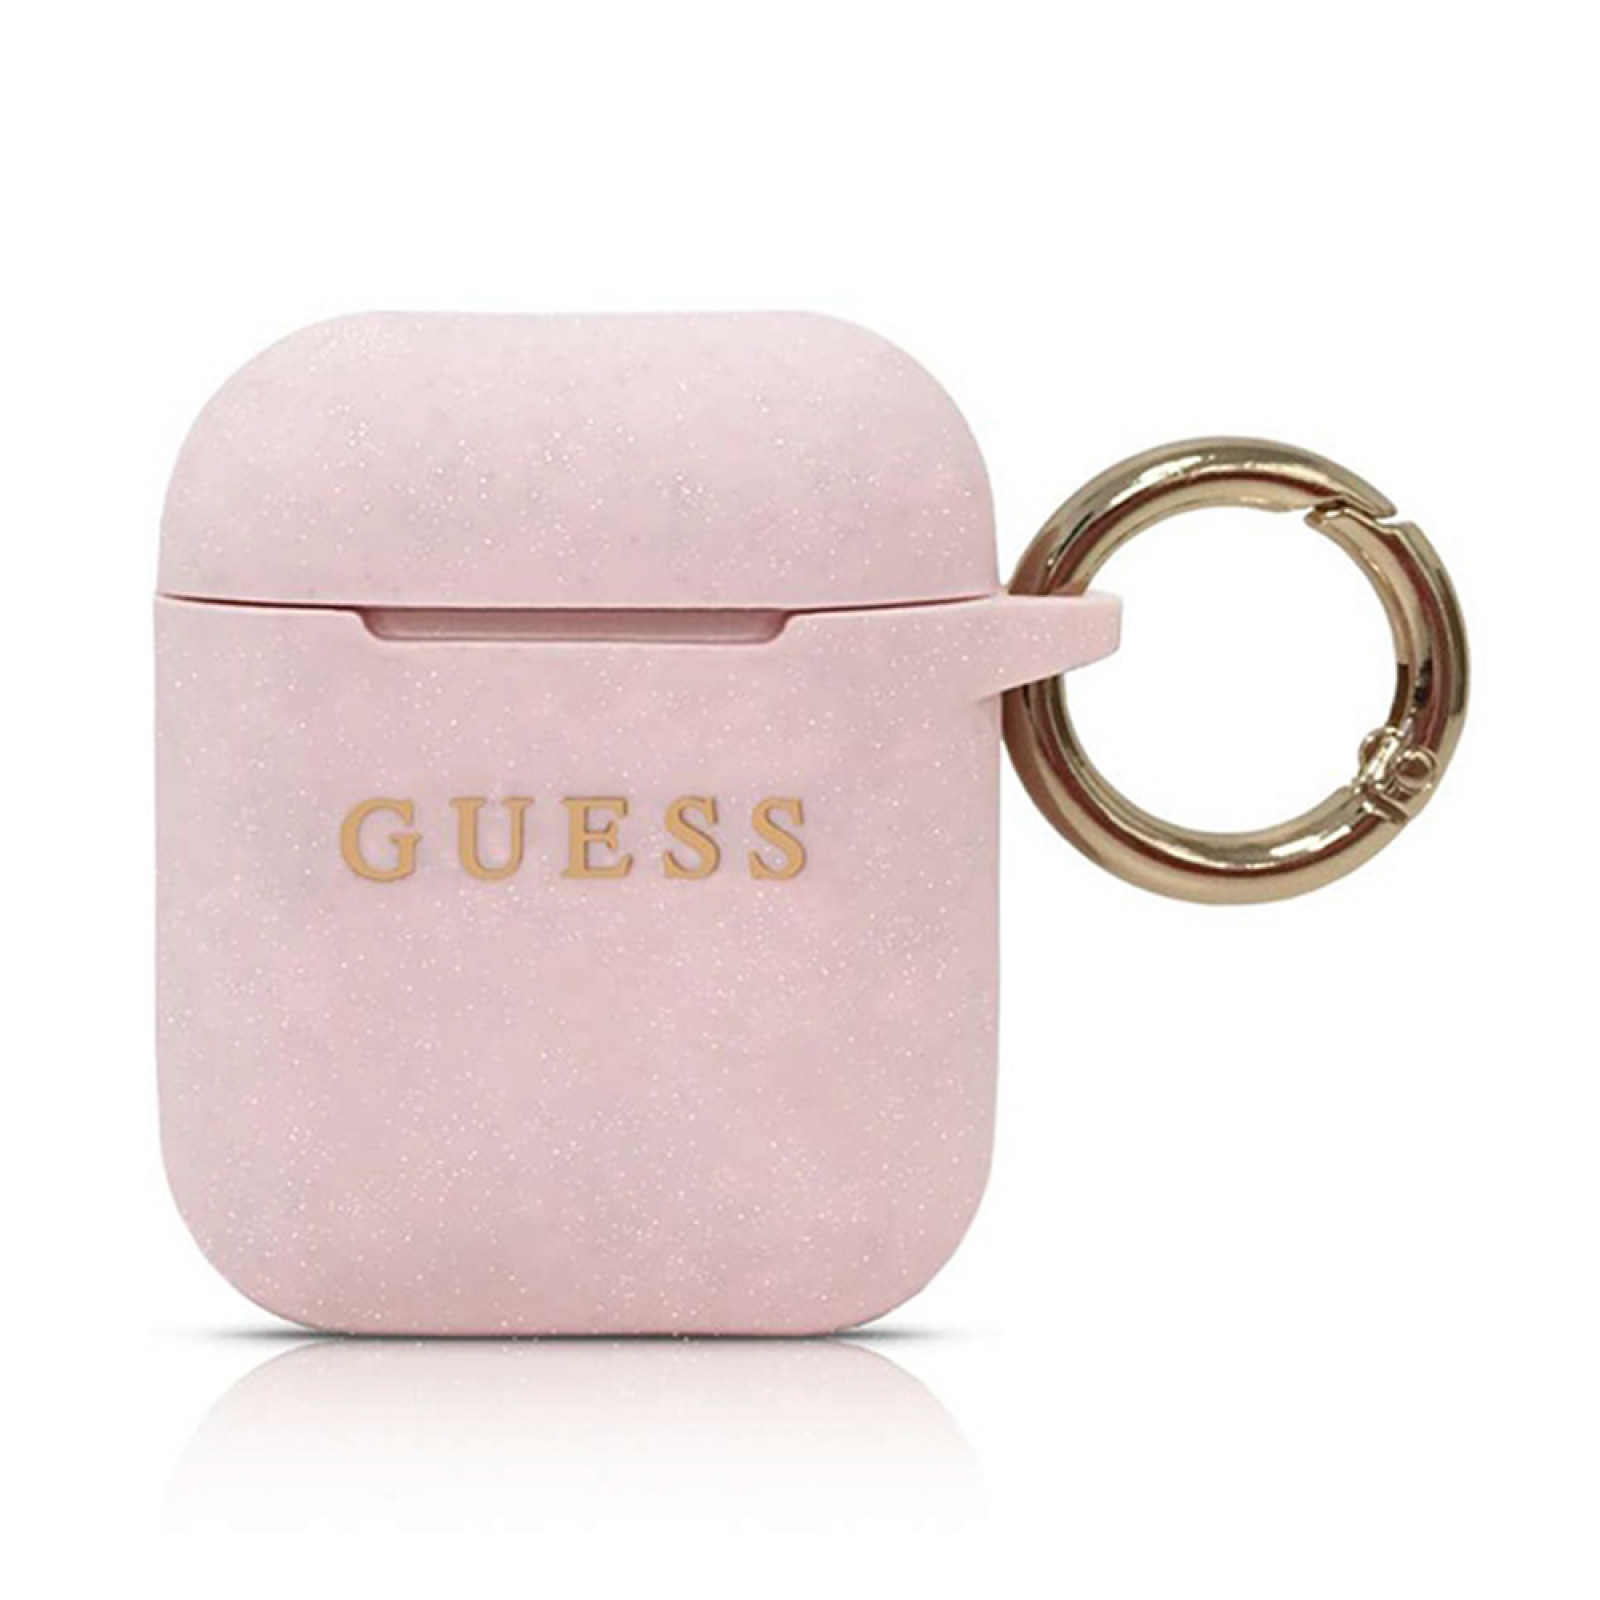 Калъф Guess Silicone Case за Airpods 1/2 - Розов